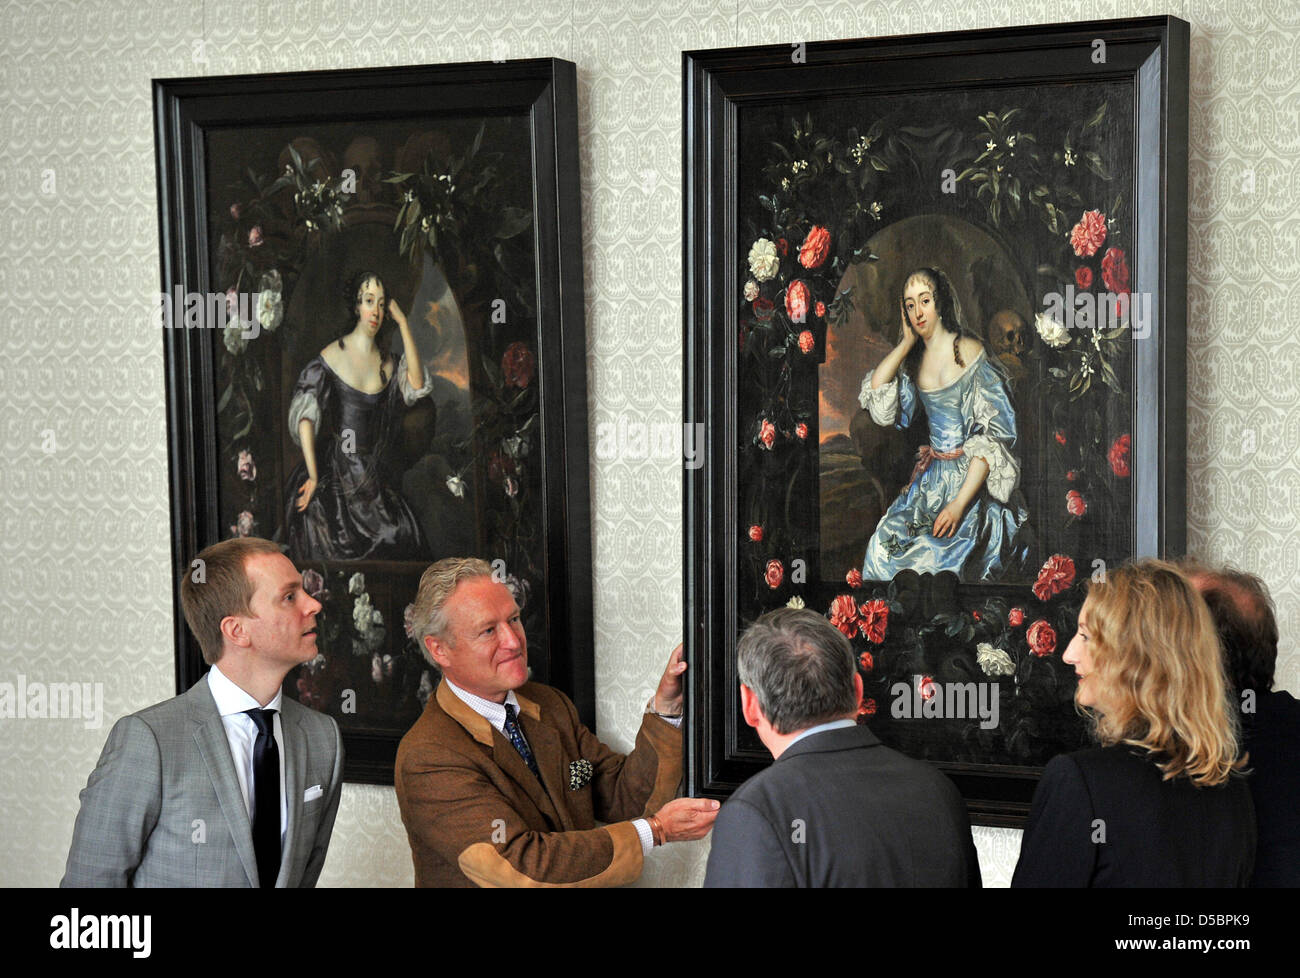 Thomas Weiss (2-L) presents the portraits of Countess Albertine Agnes of Orange-Nassau (L) and Princess Marie of Orange-Nassau (R) by Dutch painter Jan Mijtens ((1613/14-1670) at Oranienbaum Palace in Oranienbaum, Germany, 14 September 2010. After 200 years, the two precious paintings are back at the palace listed as UNESCO World Heritage Site. They were purchased from the royal Ho Stock Photo